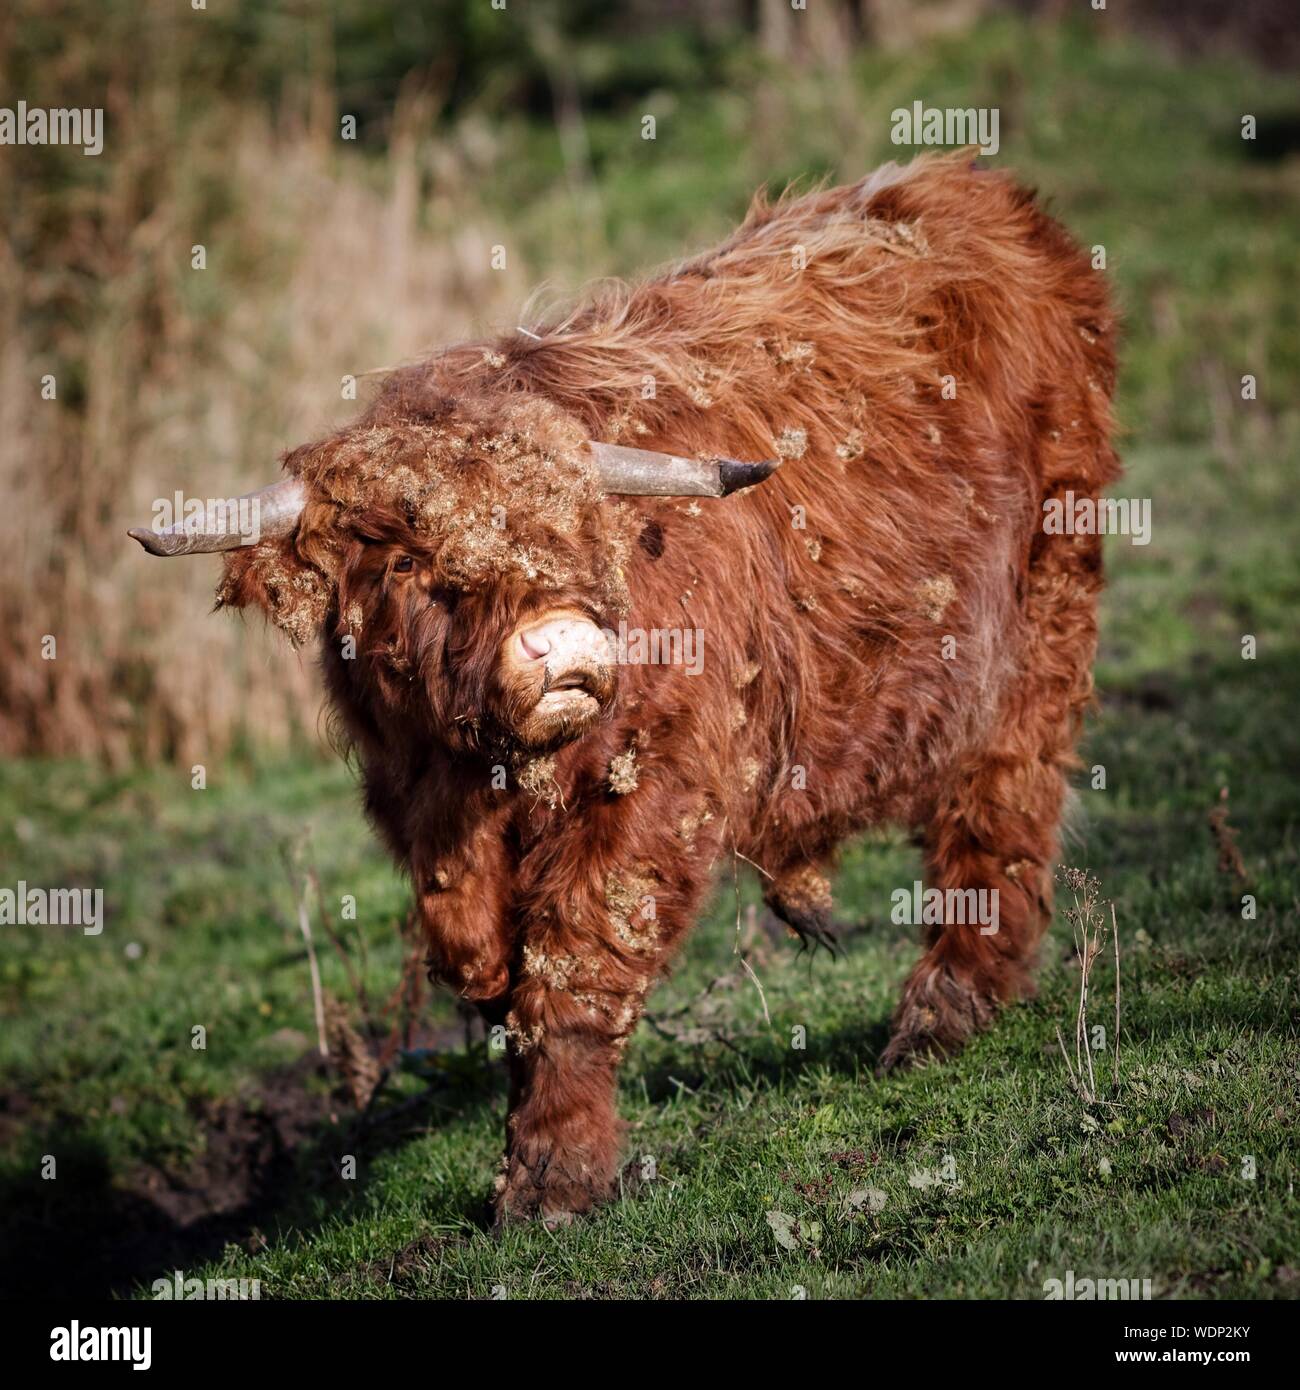 Balades Highland cattle On Grassy Field Banque D'Images